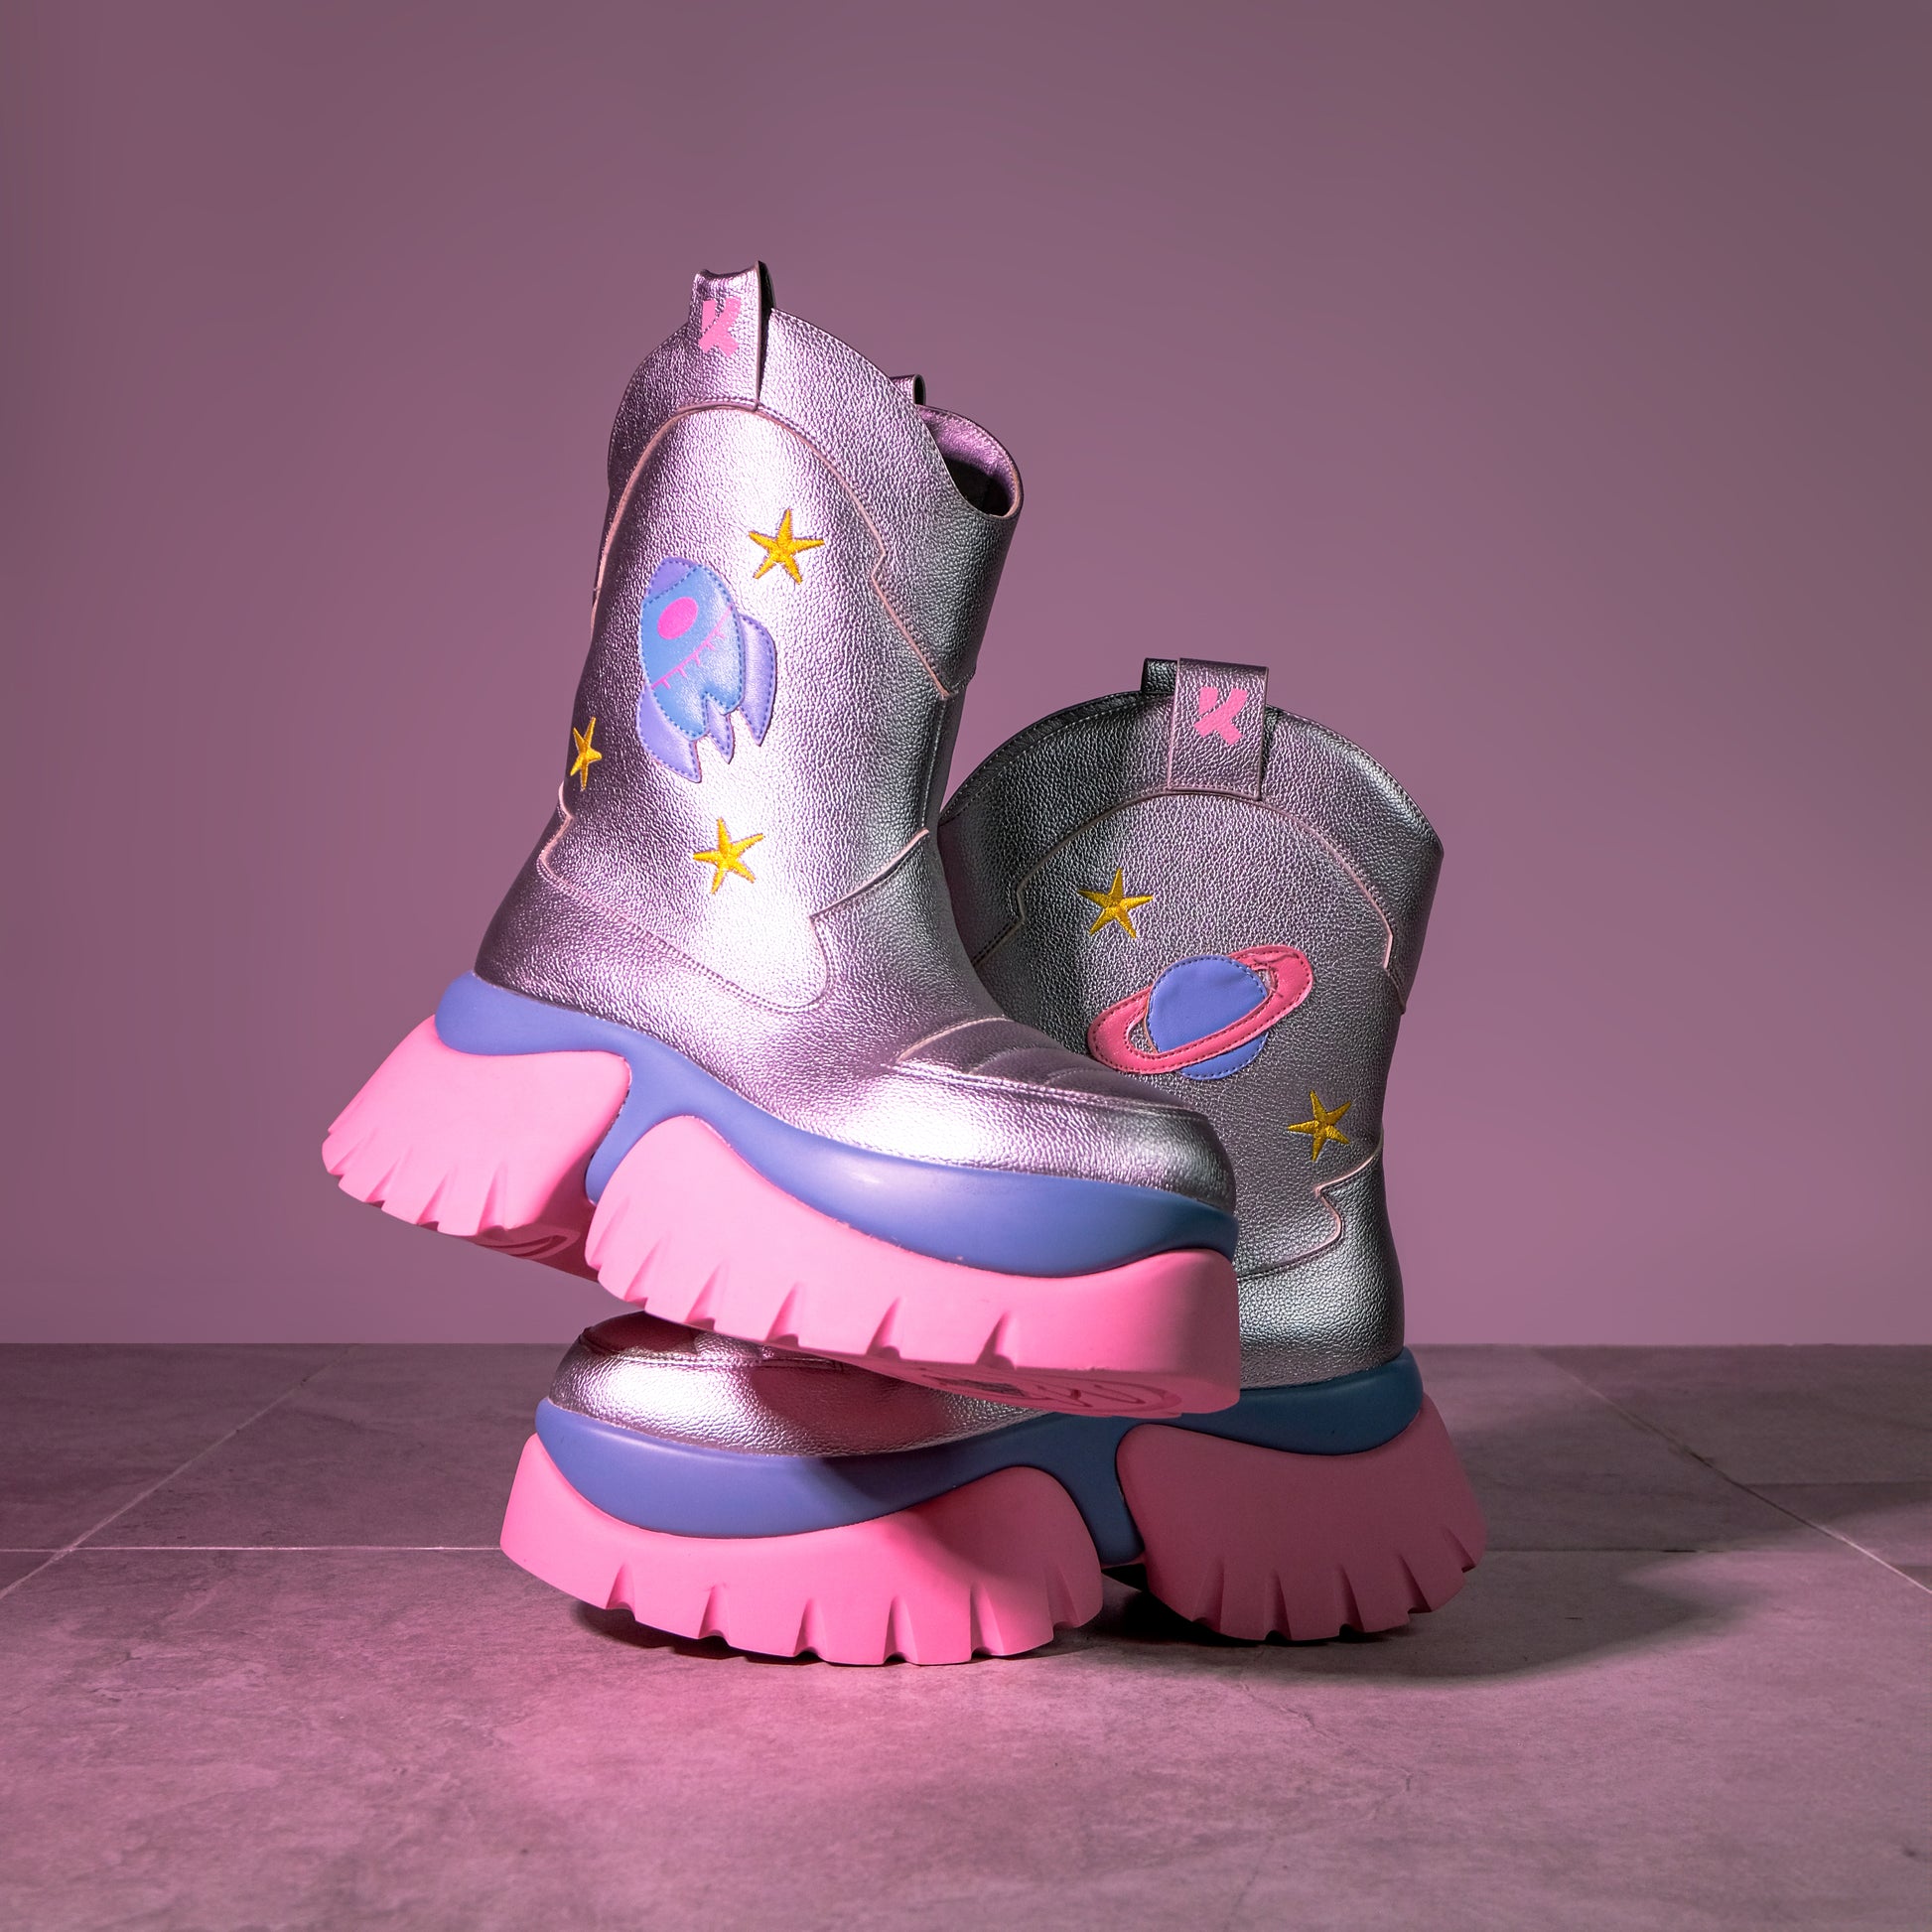 A Fairytale Galaxy Space Boots - Silver - Ankle Boots - KOI Footwear - Silver - Two Side Details